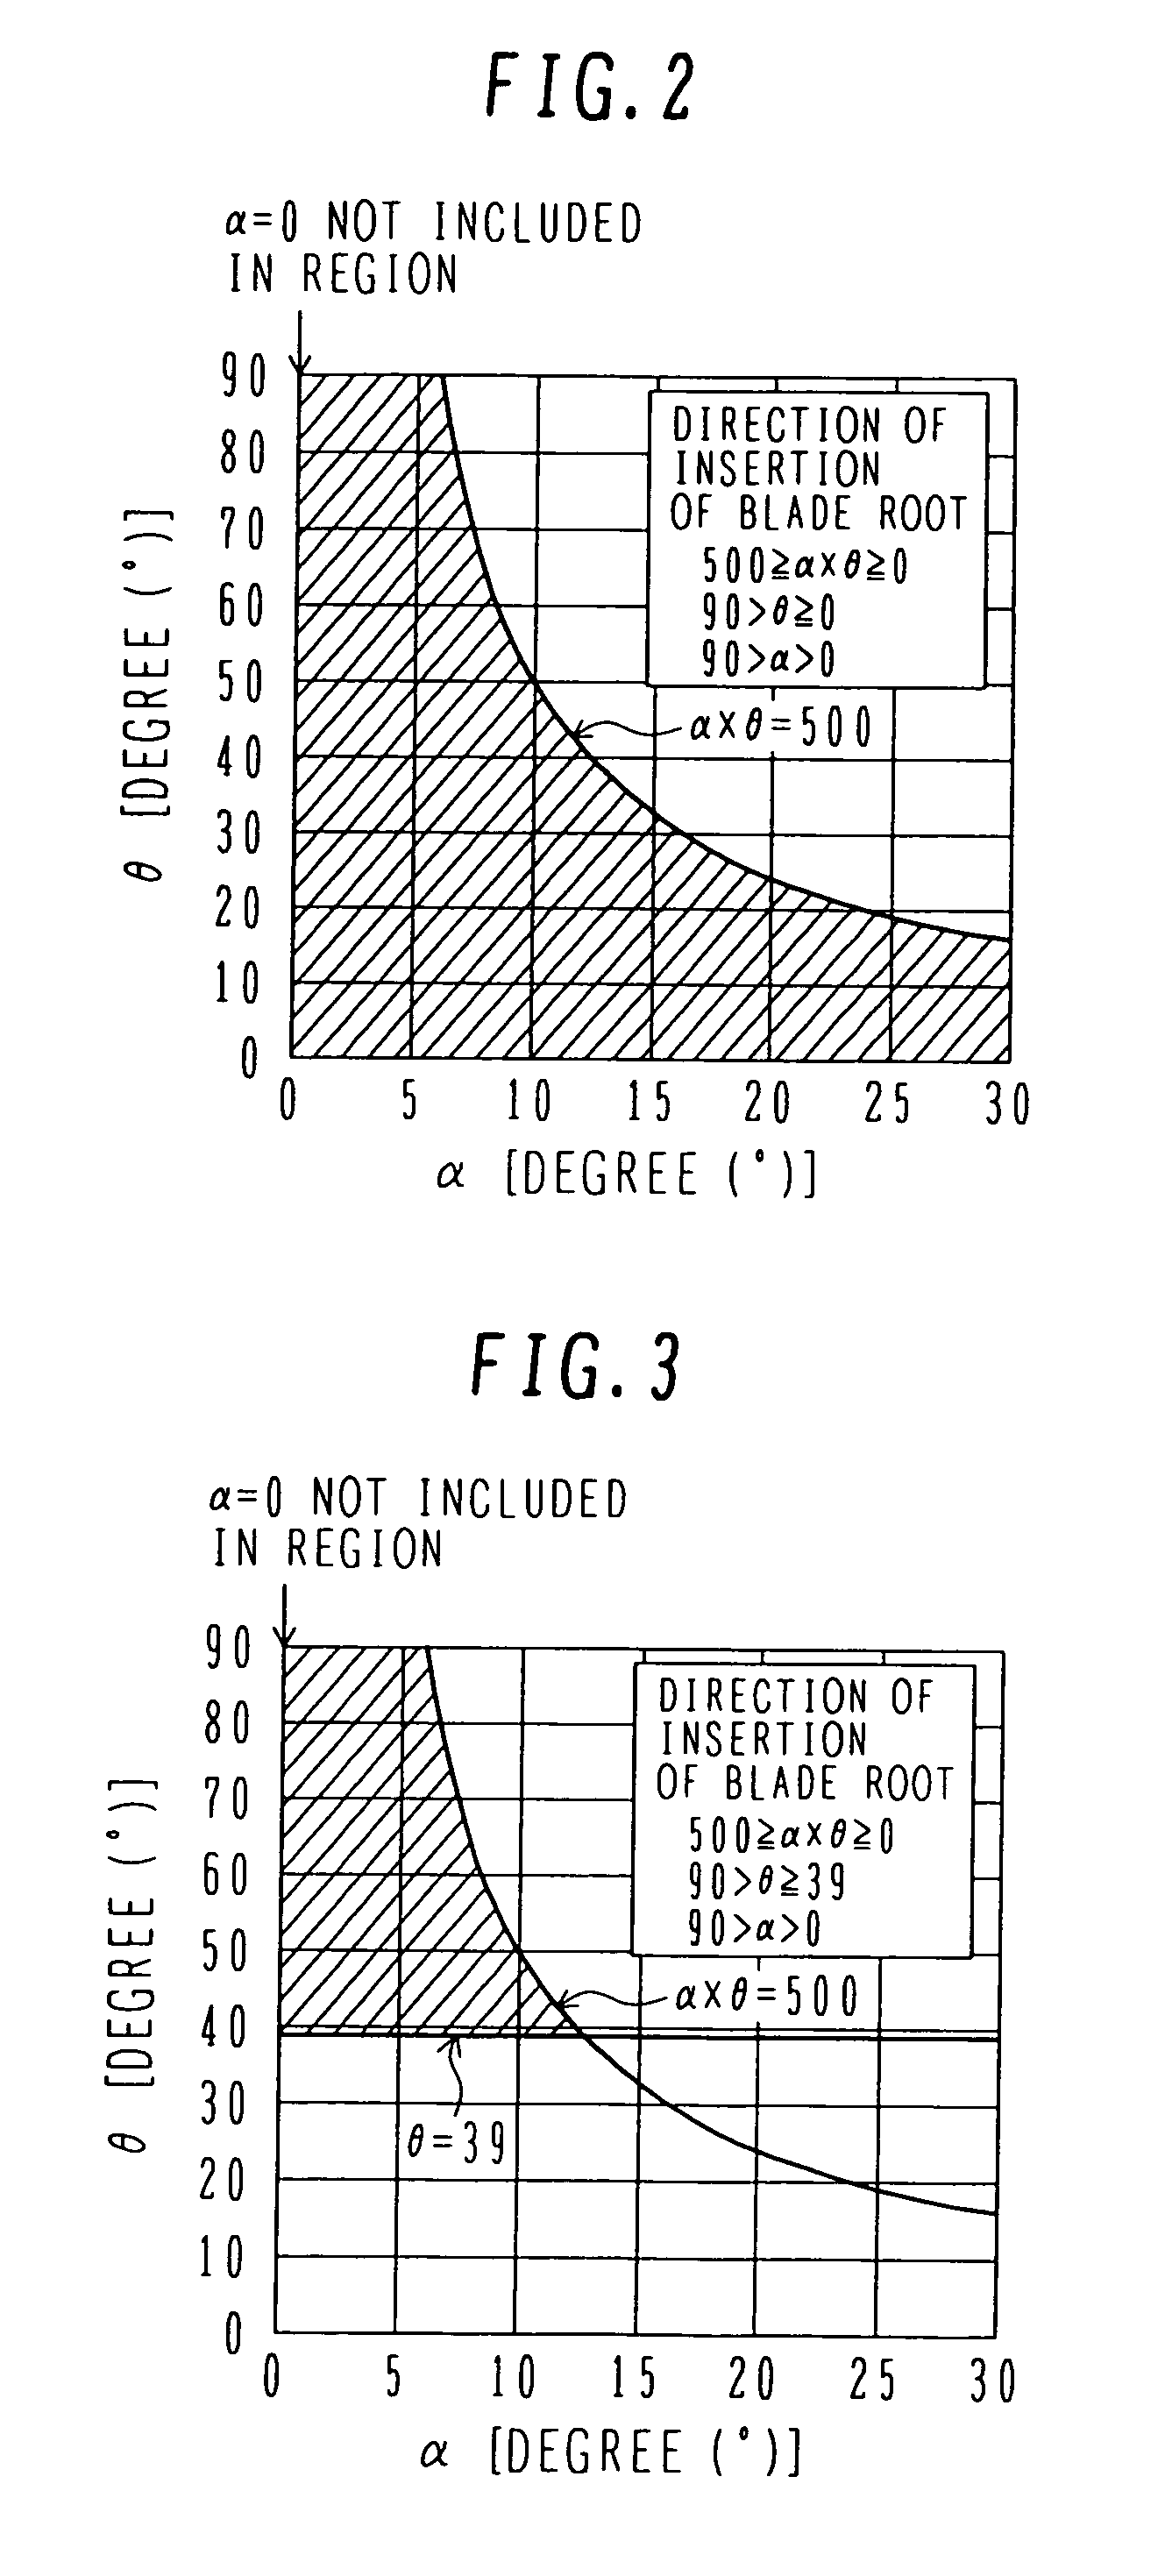 Steam turbine blade, steam turbine rotor, steam turbine with those blades and rotors, and power plant with the turbines